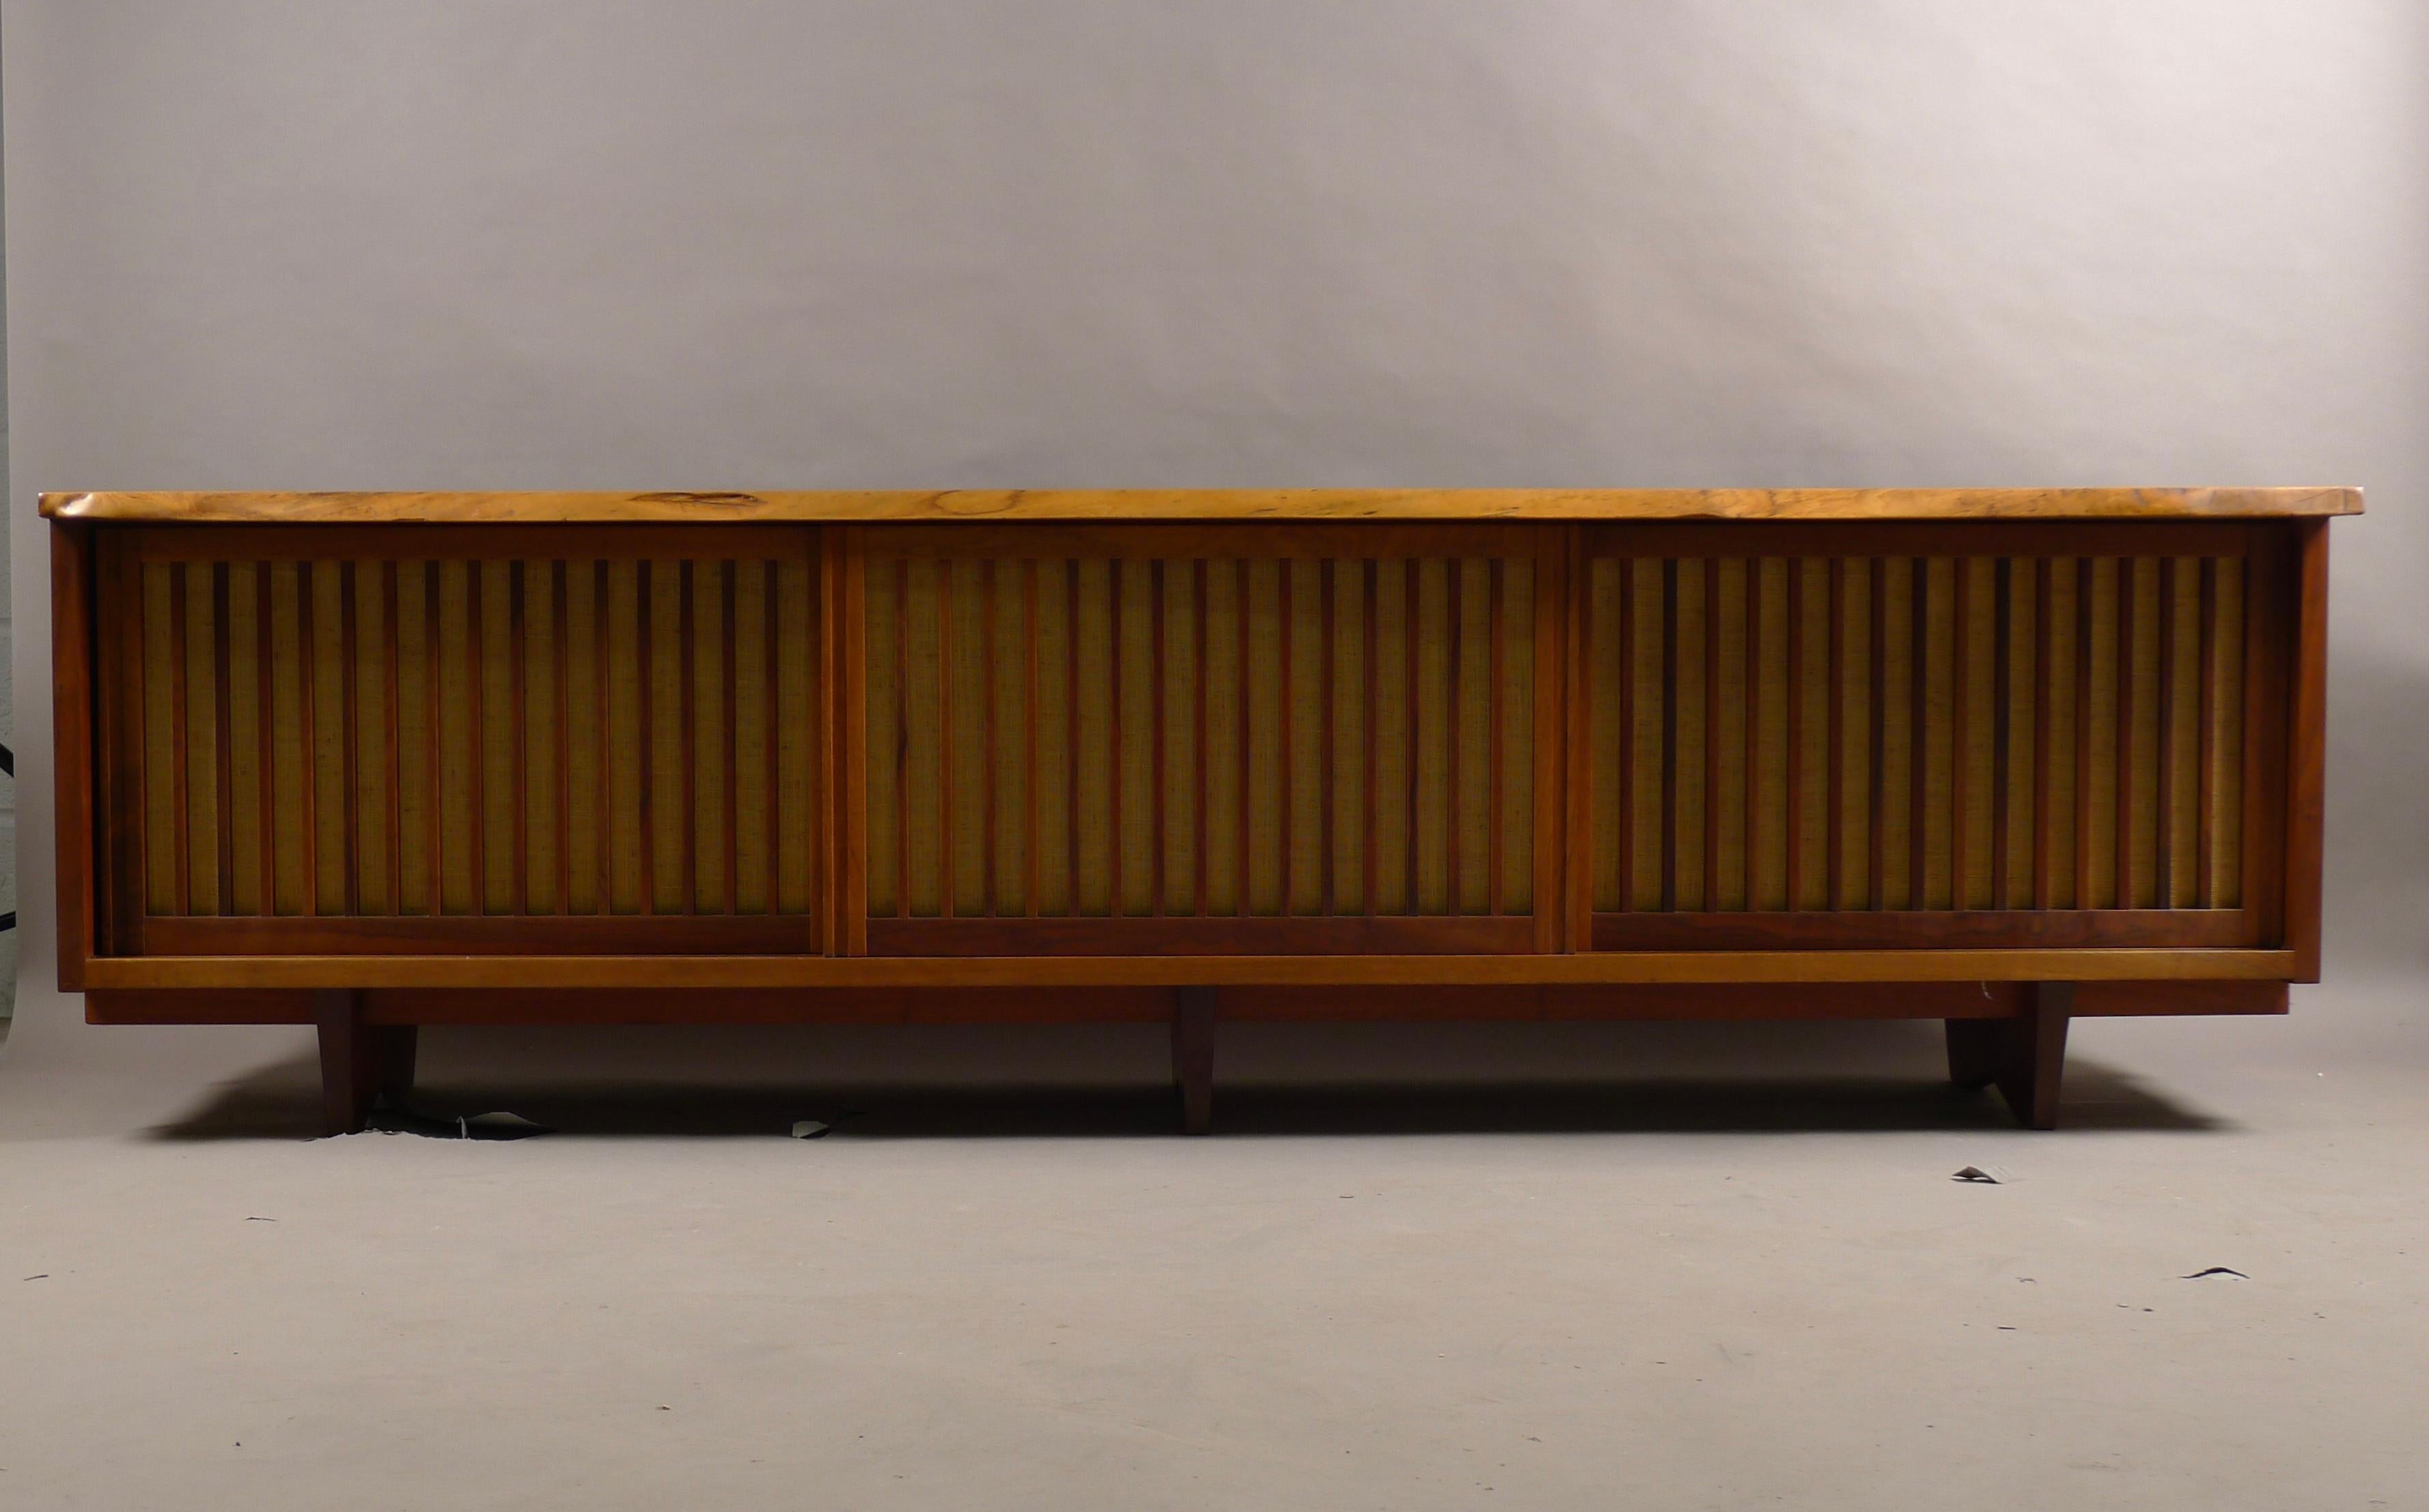 George Nakashima exceptional room divider or credenza, can function in either role as the cabinet is also finished on the back with solid timber. Constructed from Persian Walnut with a freeform overhanging top above three sliding doors which retain